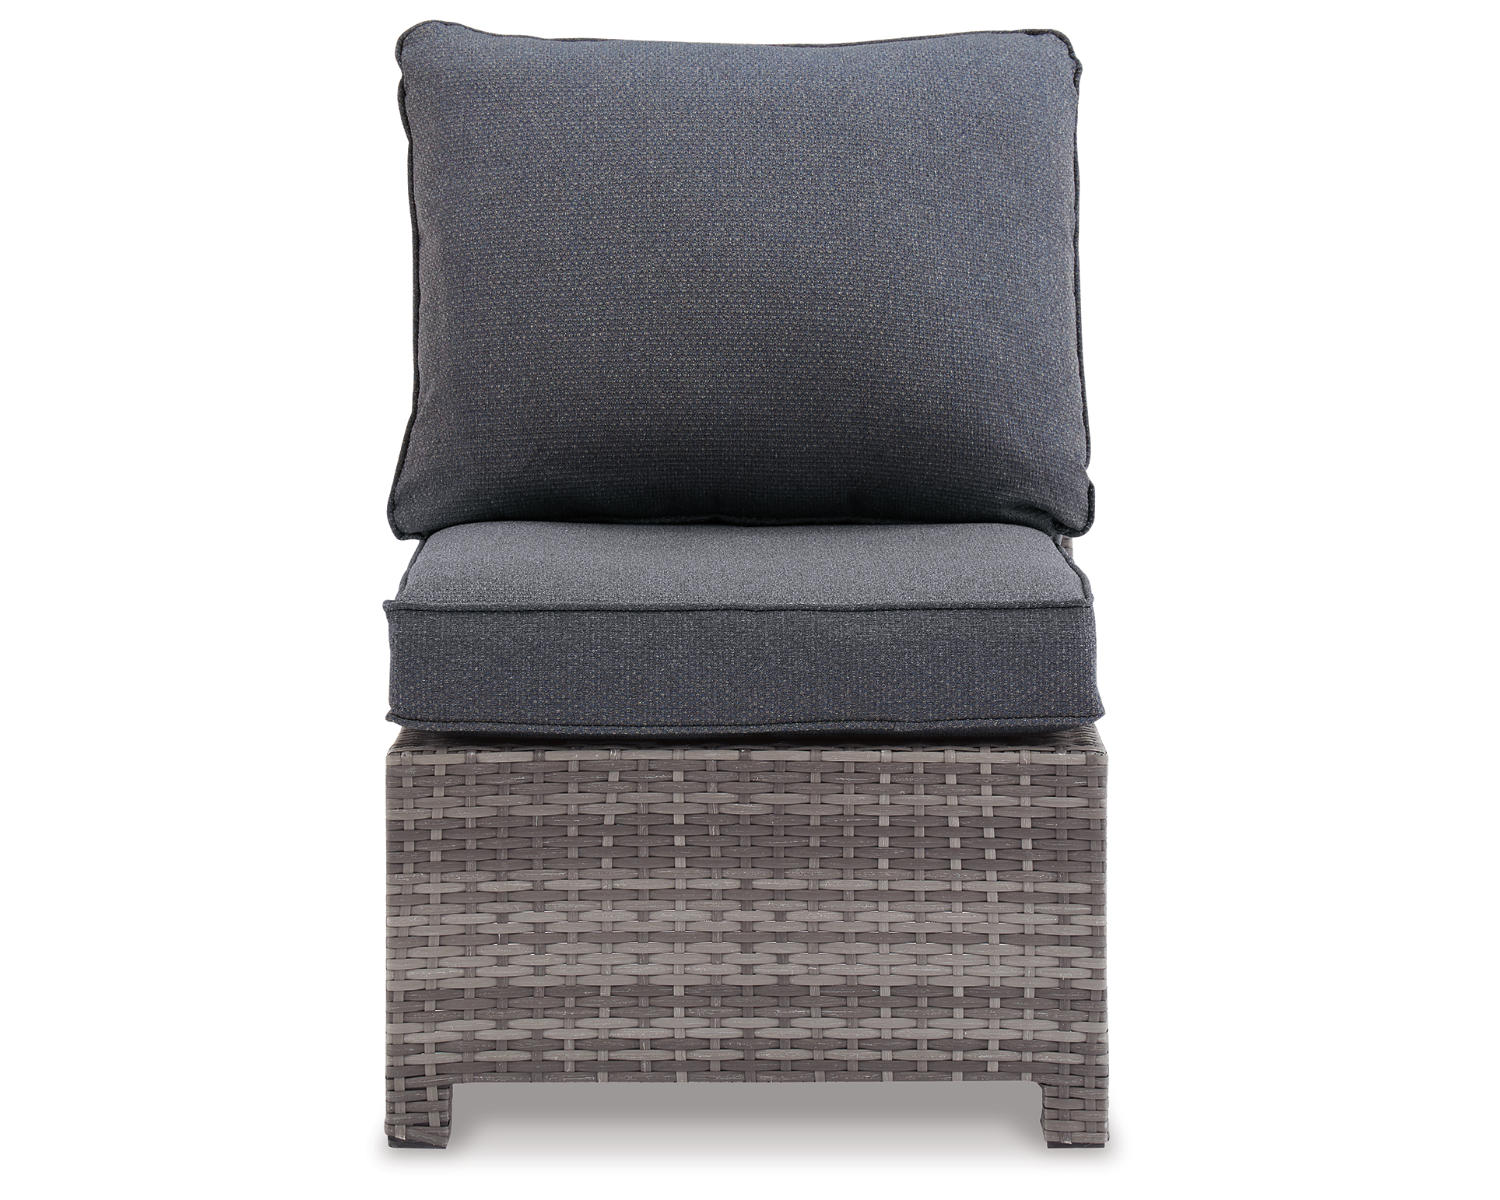 Signature Design by Ashley Salem Beach Outdoor Resin Wicker Armless Chair, Gray - image 4 of 6